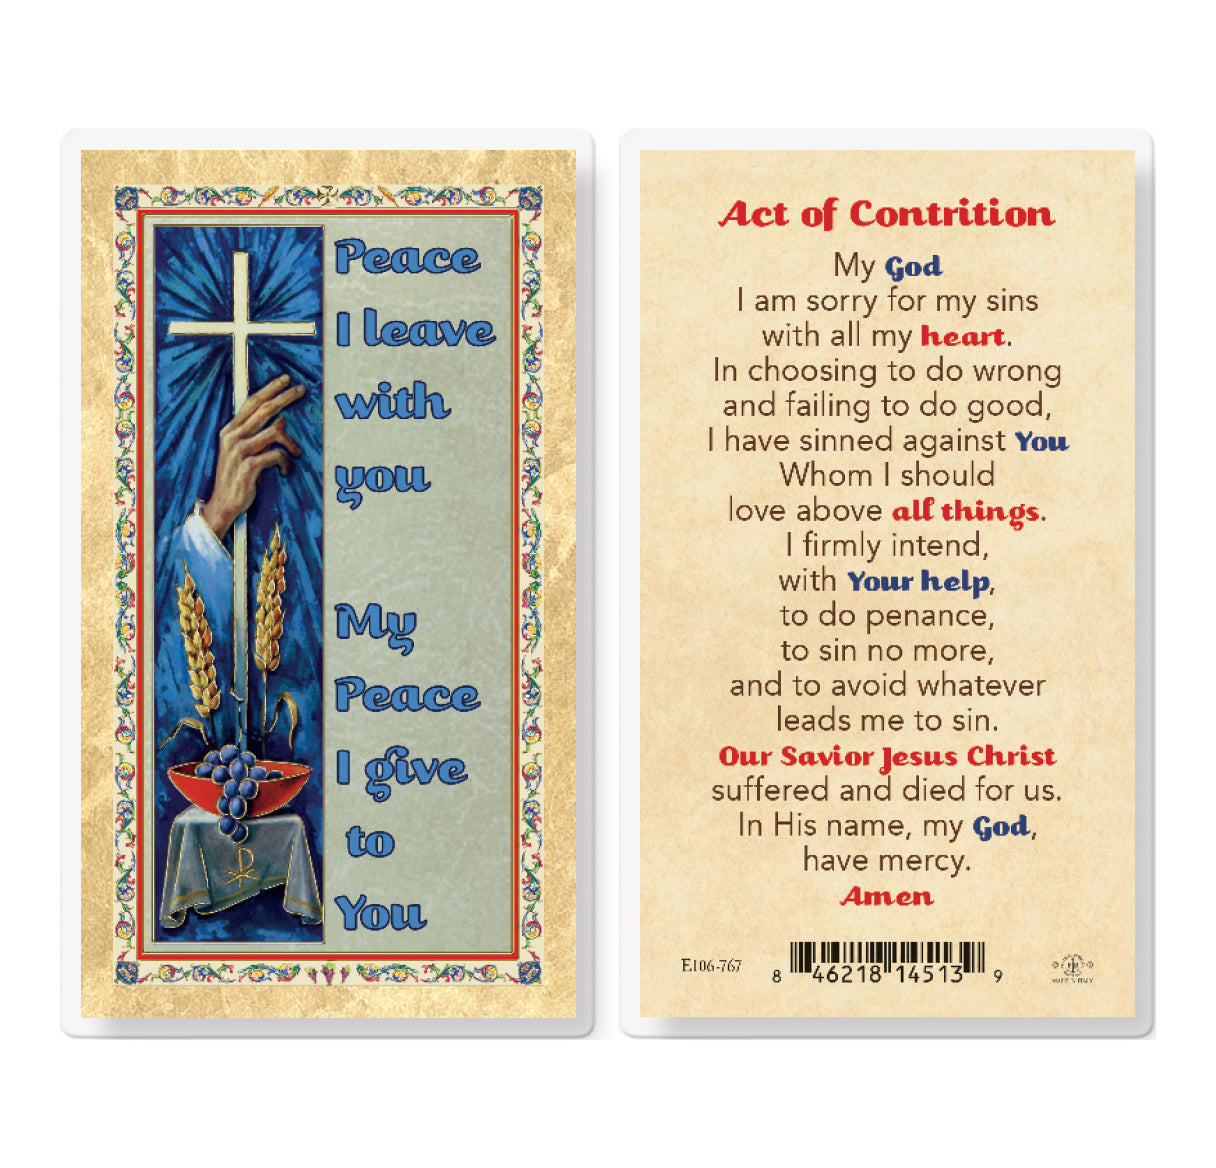 Act of Contrition Gold-Stamped Laminated Catholic Prayer Holy Card with Prayer on Back, Pack of 25